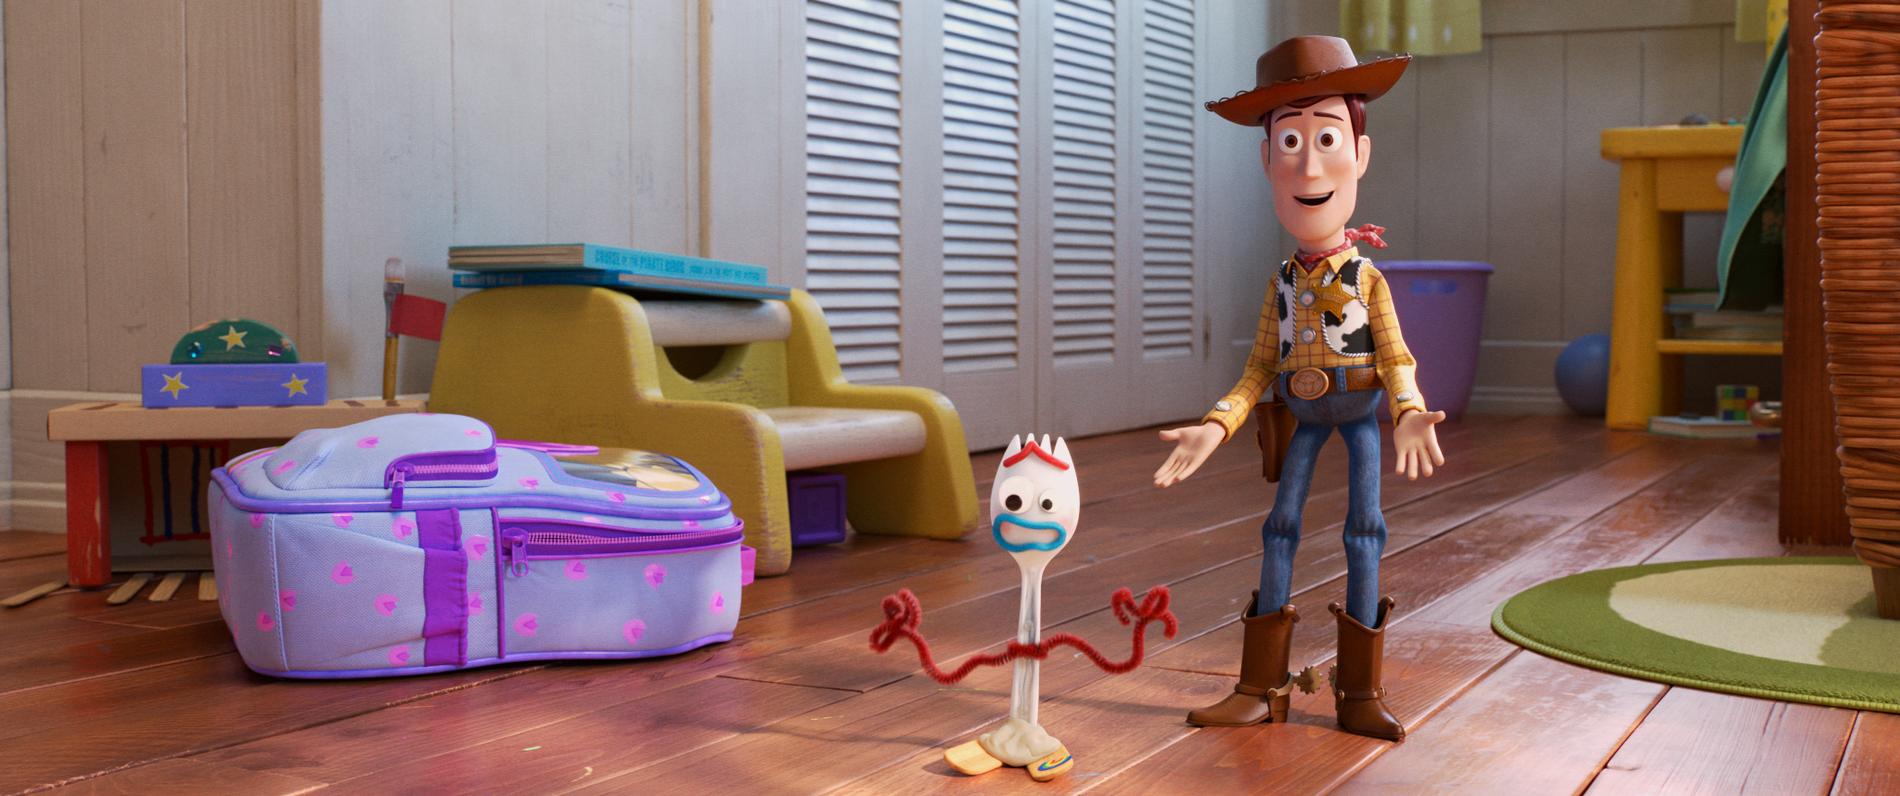 Toy story 4.